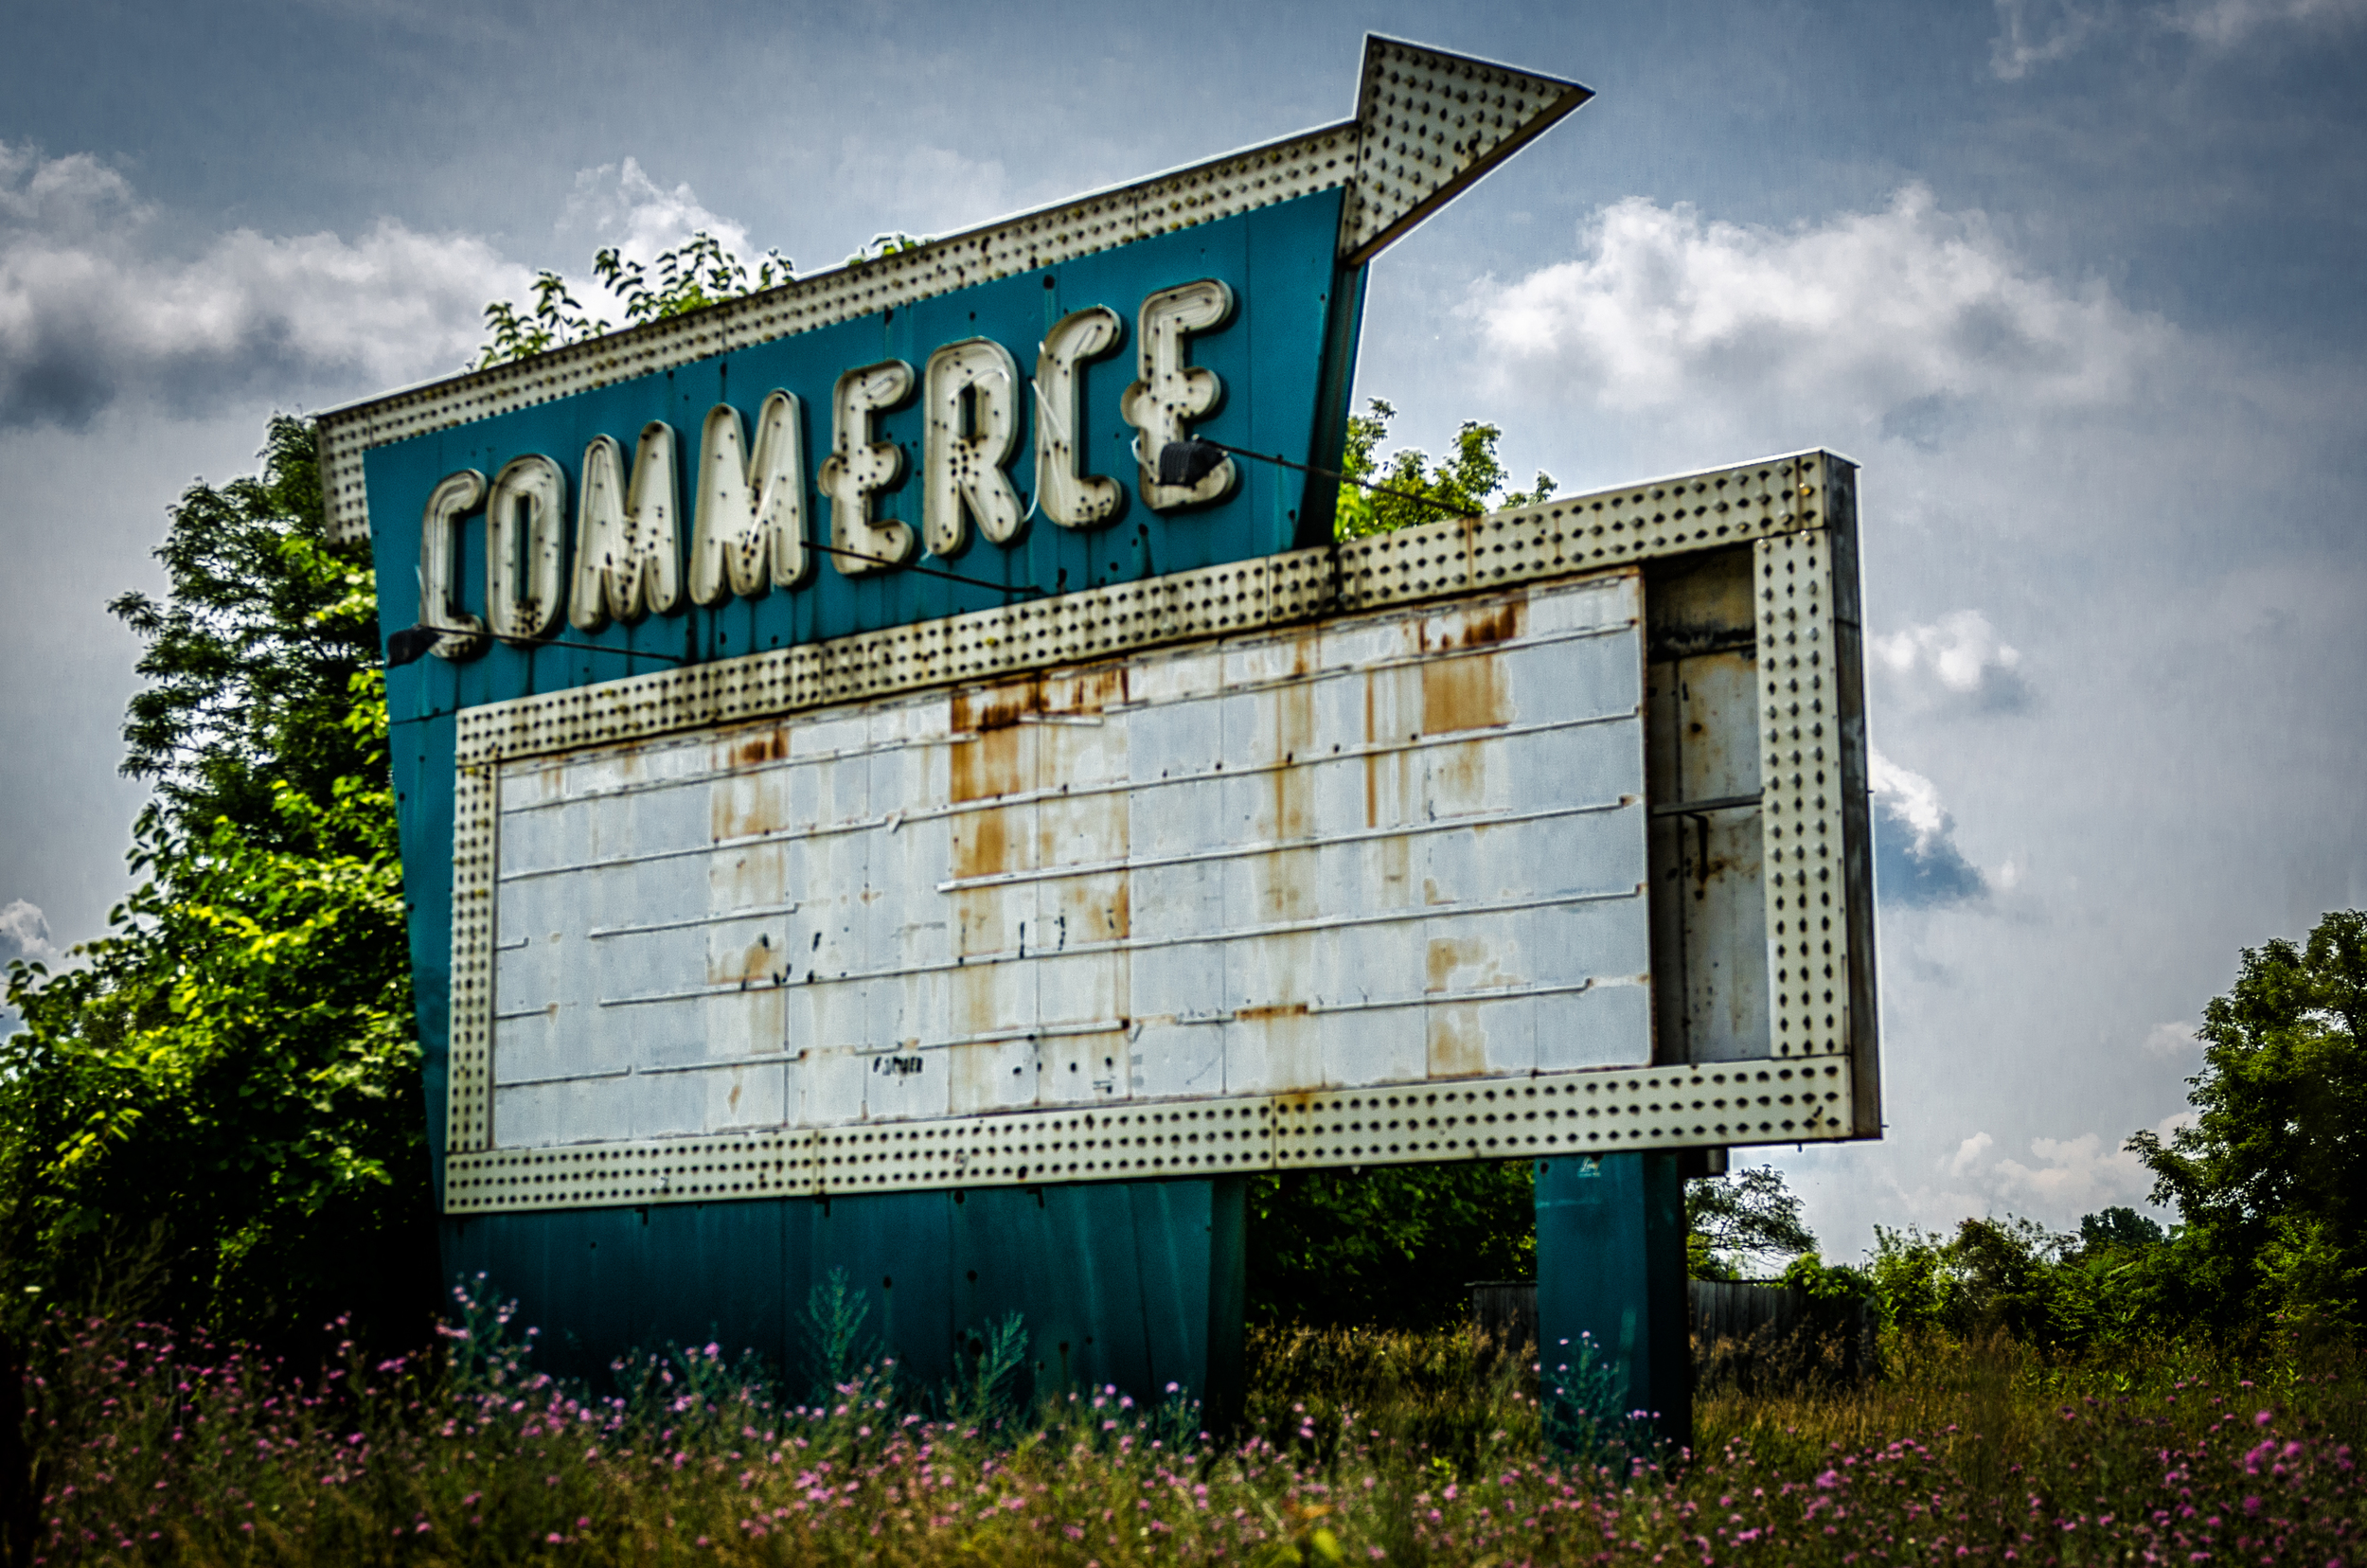 Old Commerce Drive in theater sign